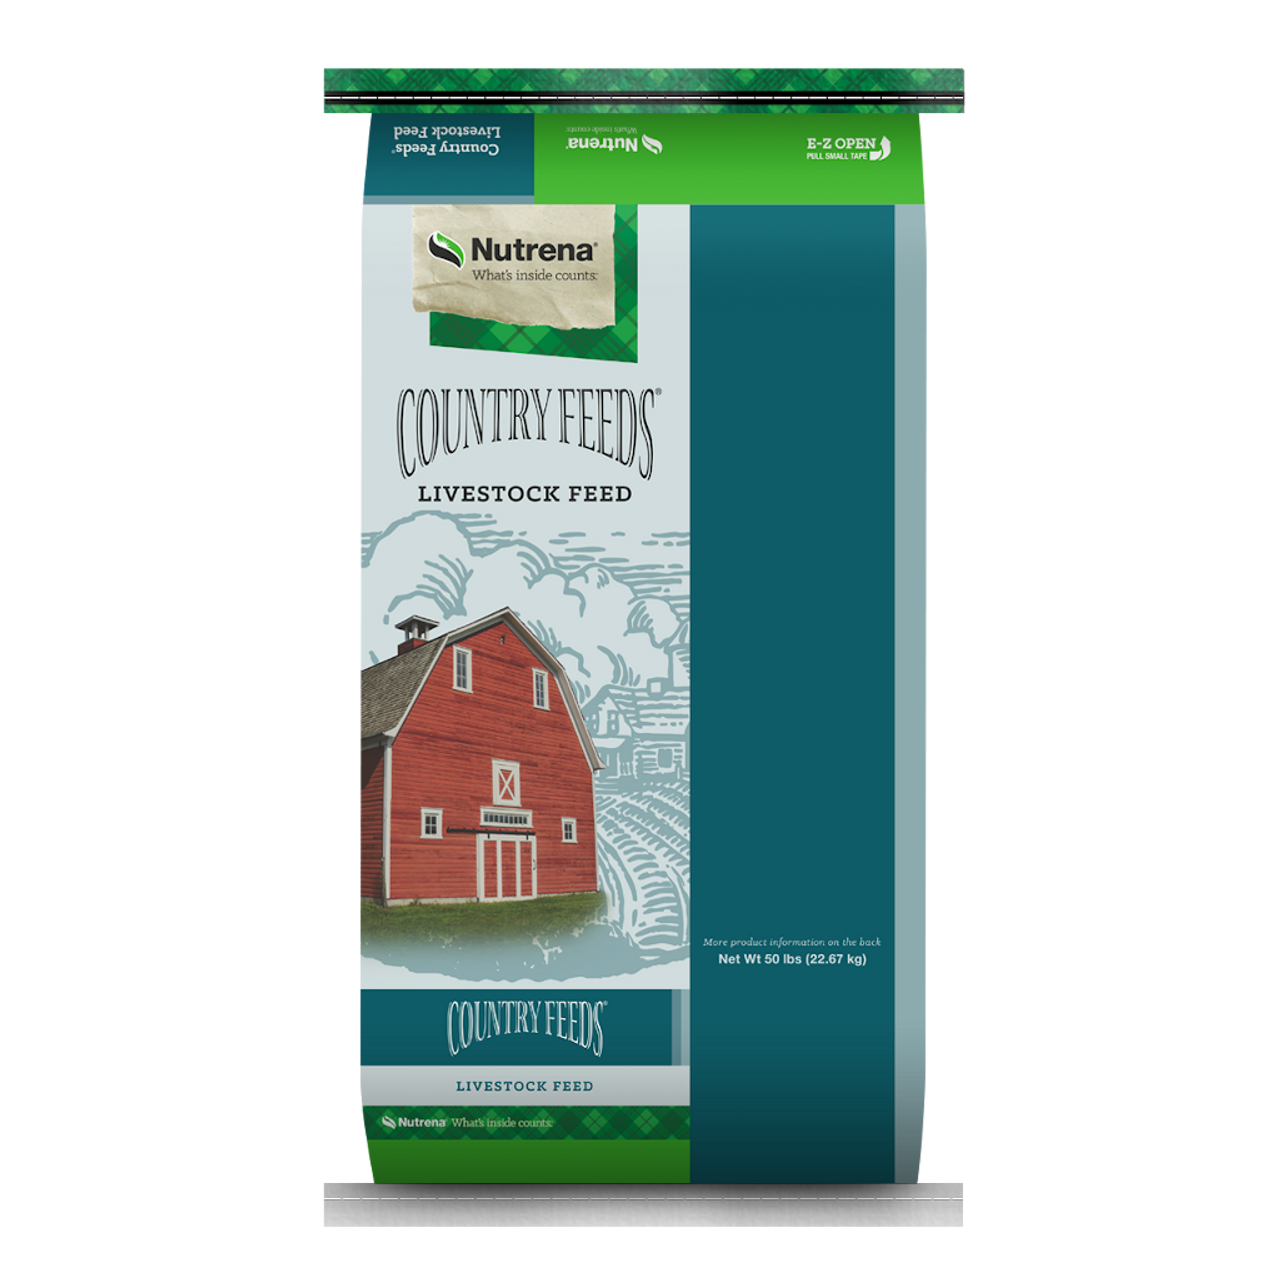 NUTRENA COUNTRY FEEDS SHEEP FEED 50 lbs